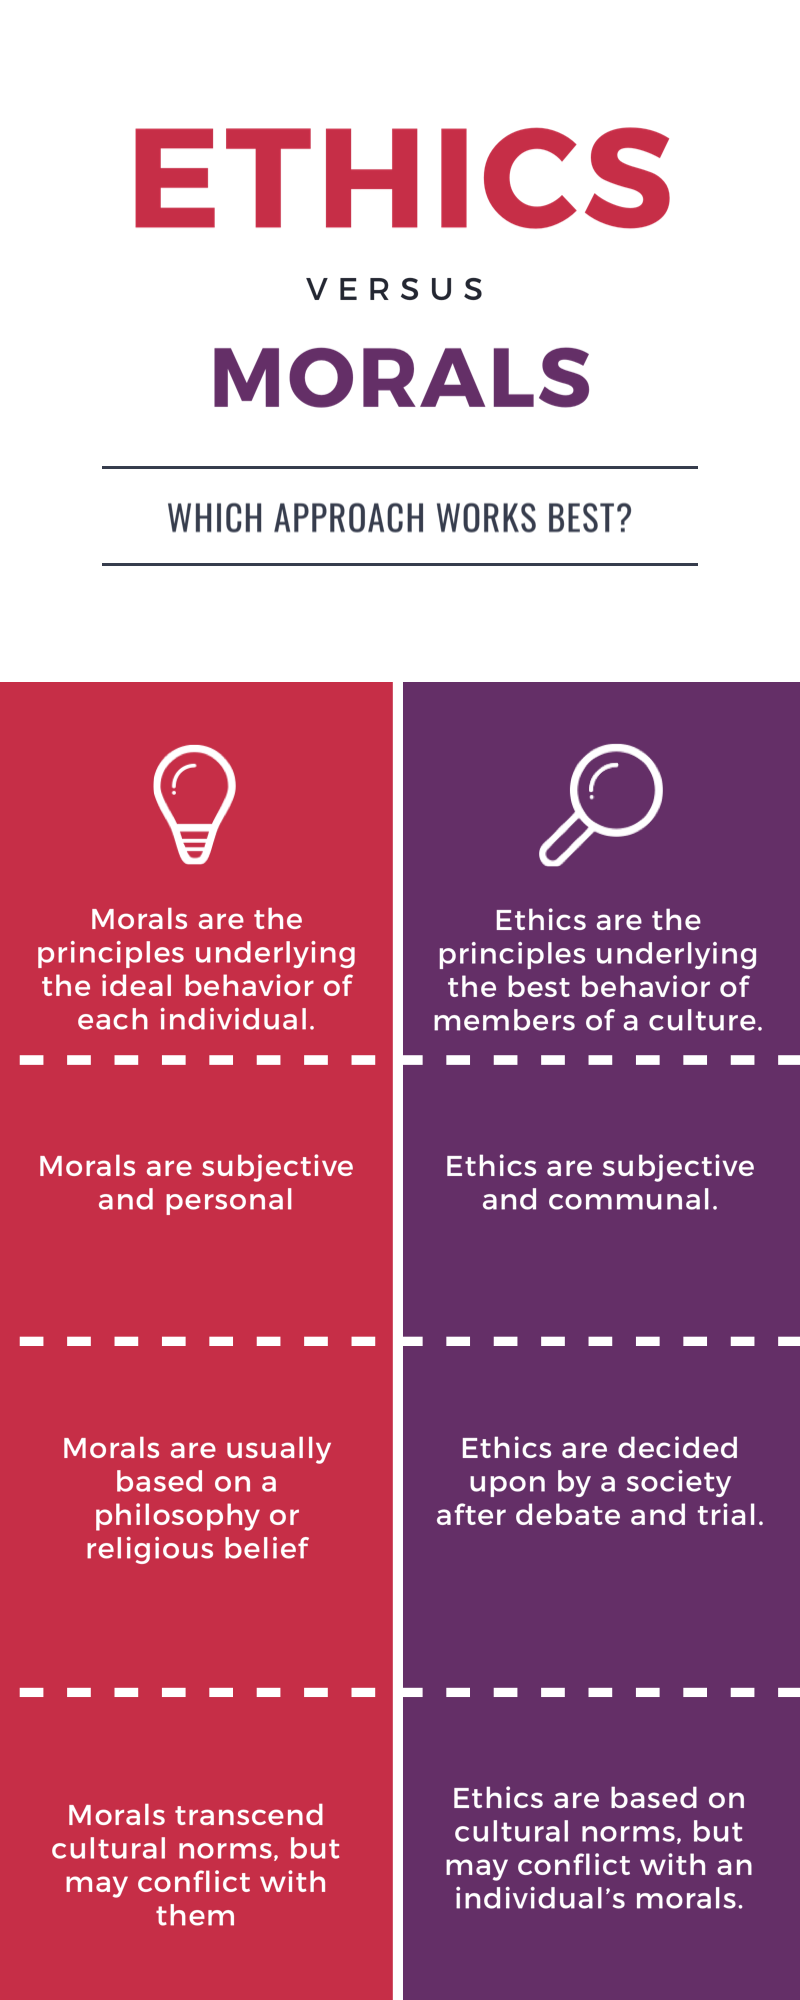 Morals are for You or Me: Ethics are for Us” – Listen Carefully